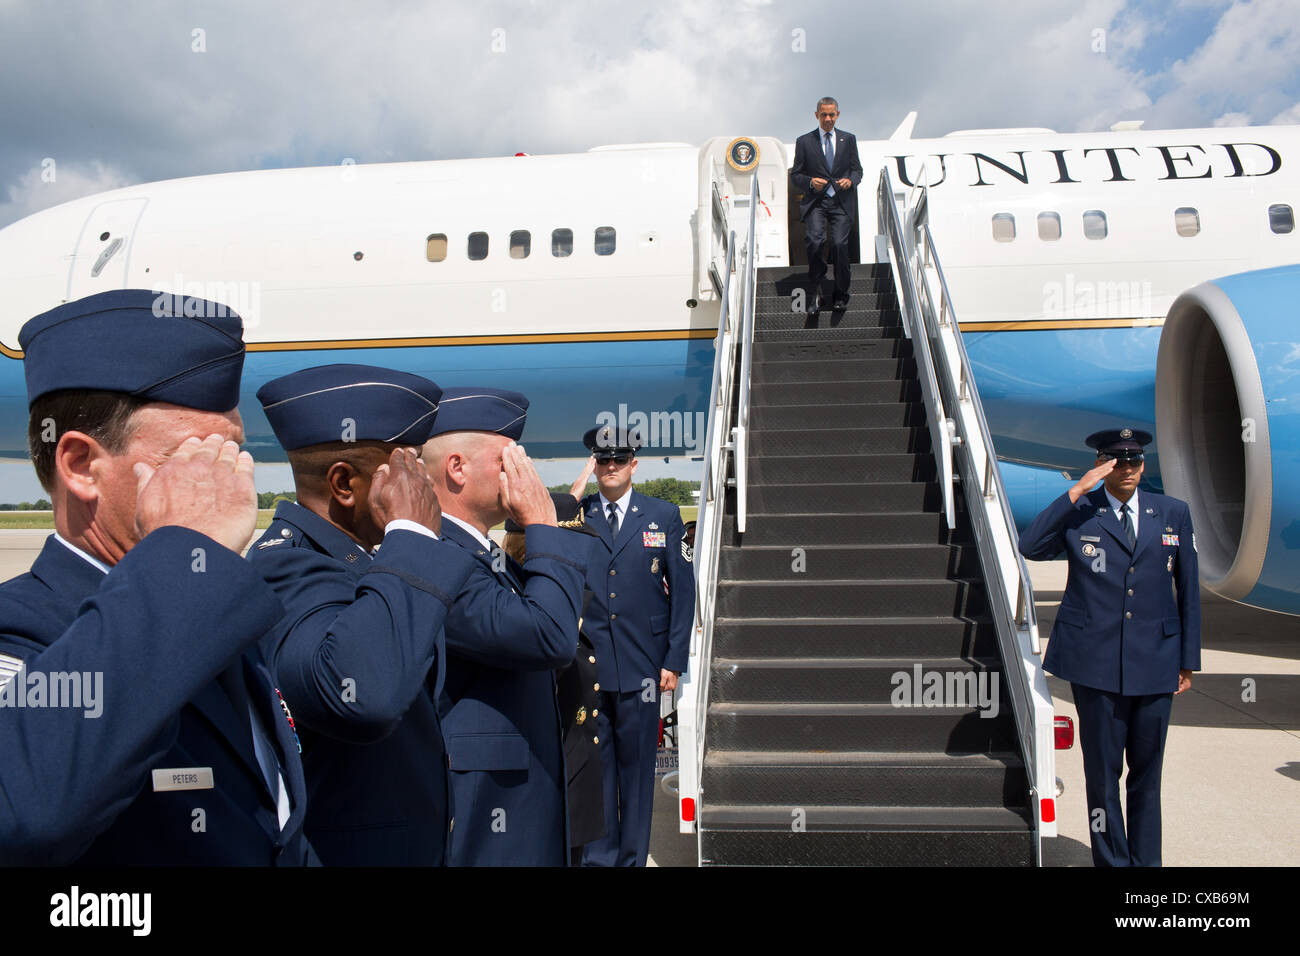 Präsident Barack Obama steigt bei seiner Ankunft in Mansfield Air National Guard Base 1. August 2012 in Mansfield, Ohio Air Force One. Stockfoto